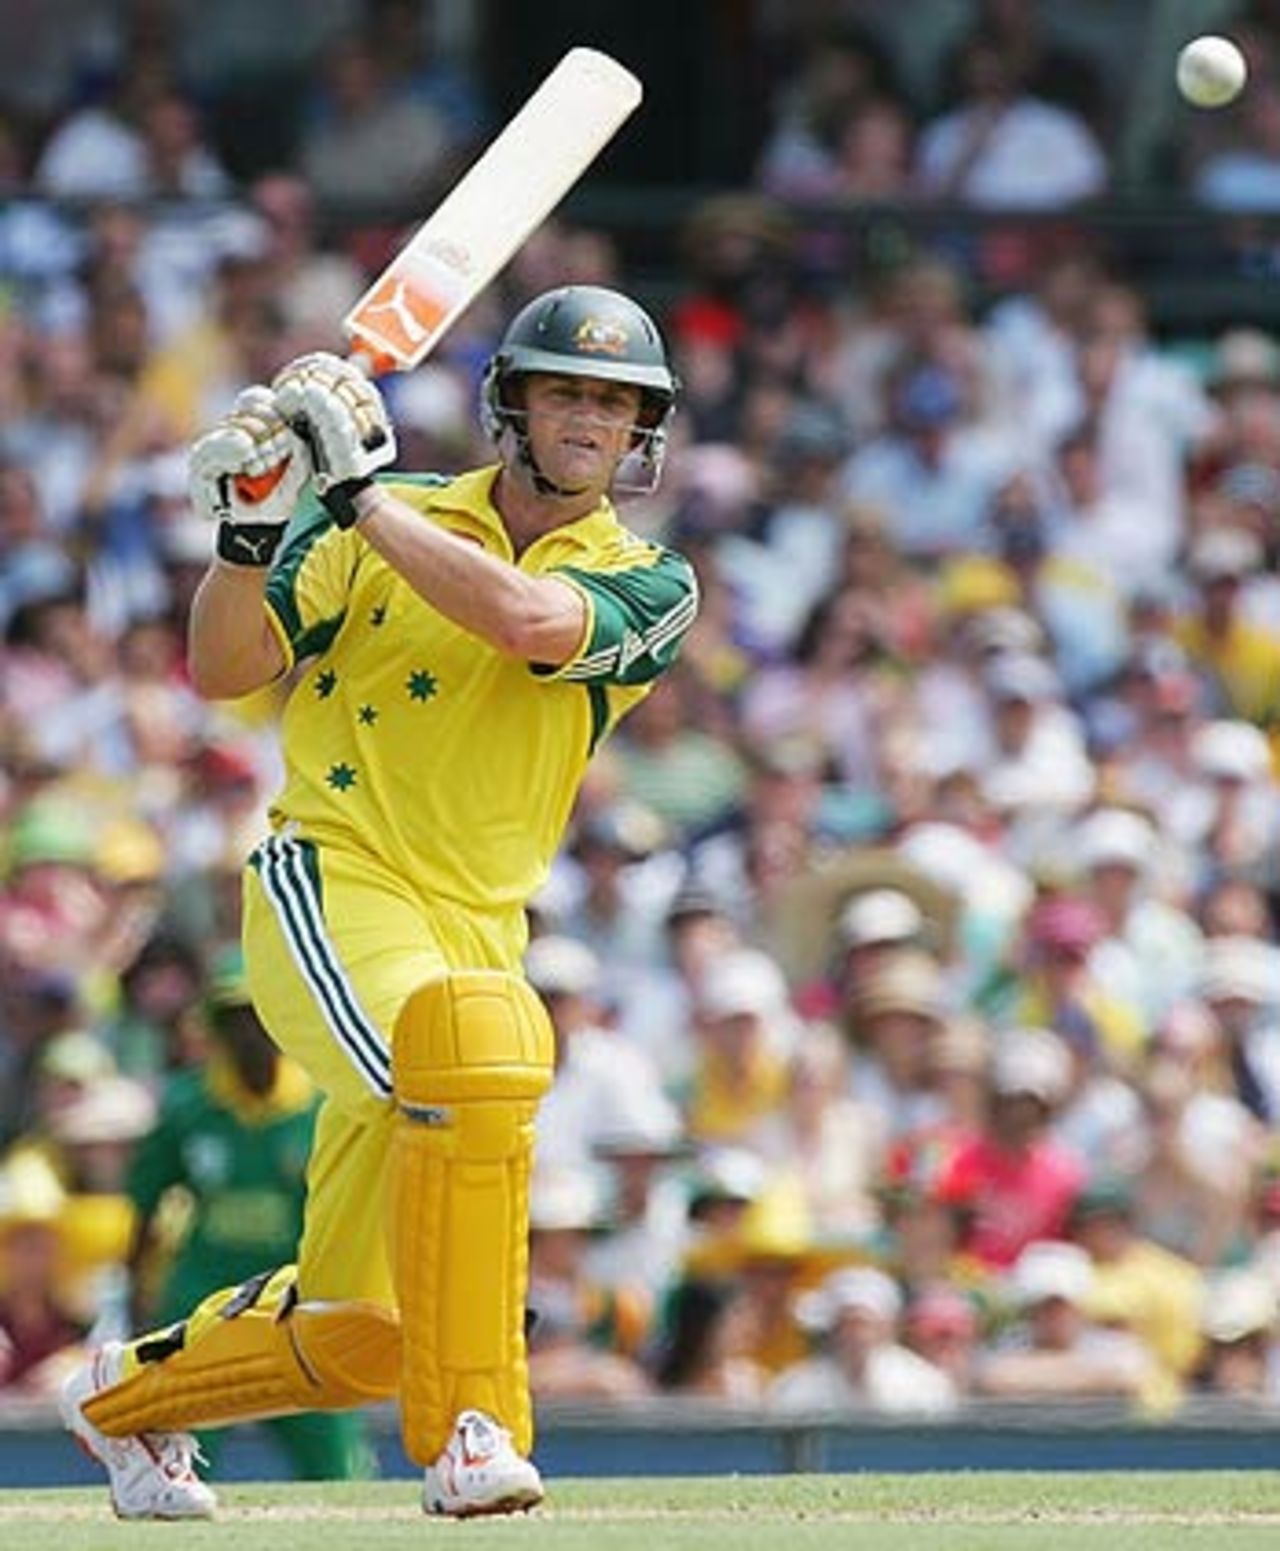 Adam Gilchrist drives during his 88 at Sydney, Australia v South Africa, VB Series, Sydney, February 5, 2006